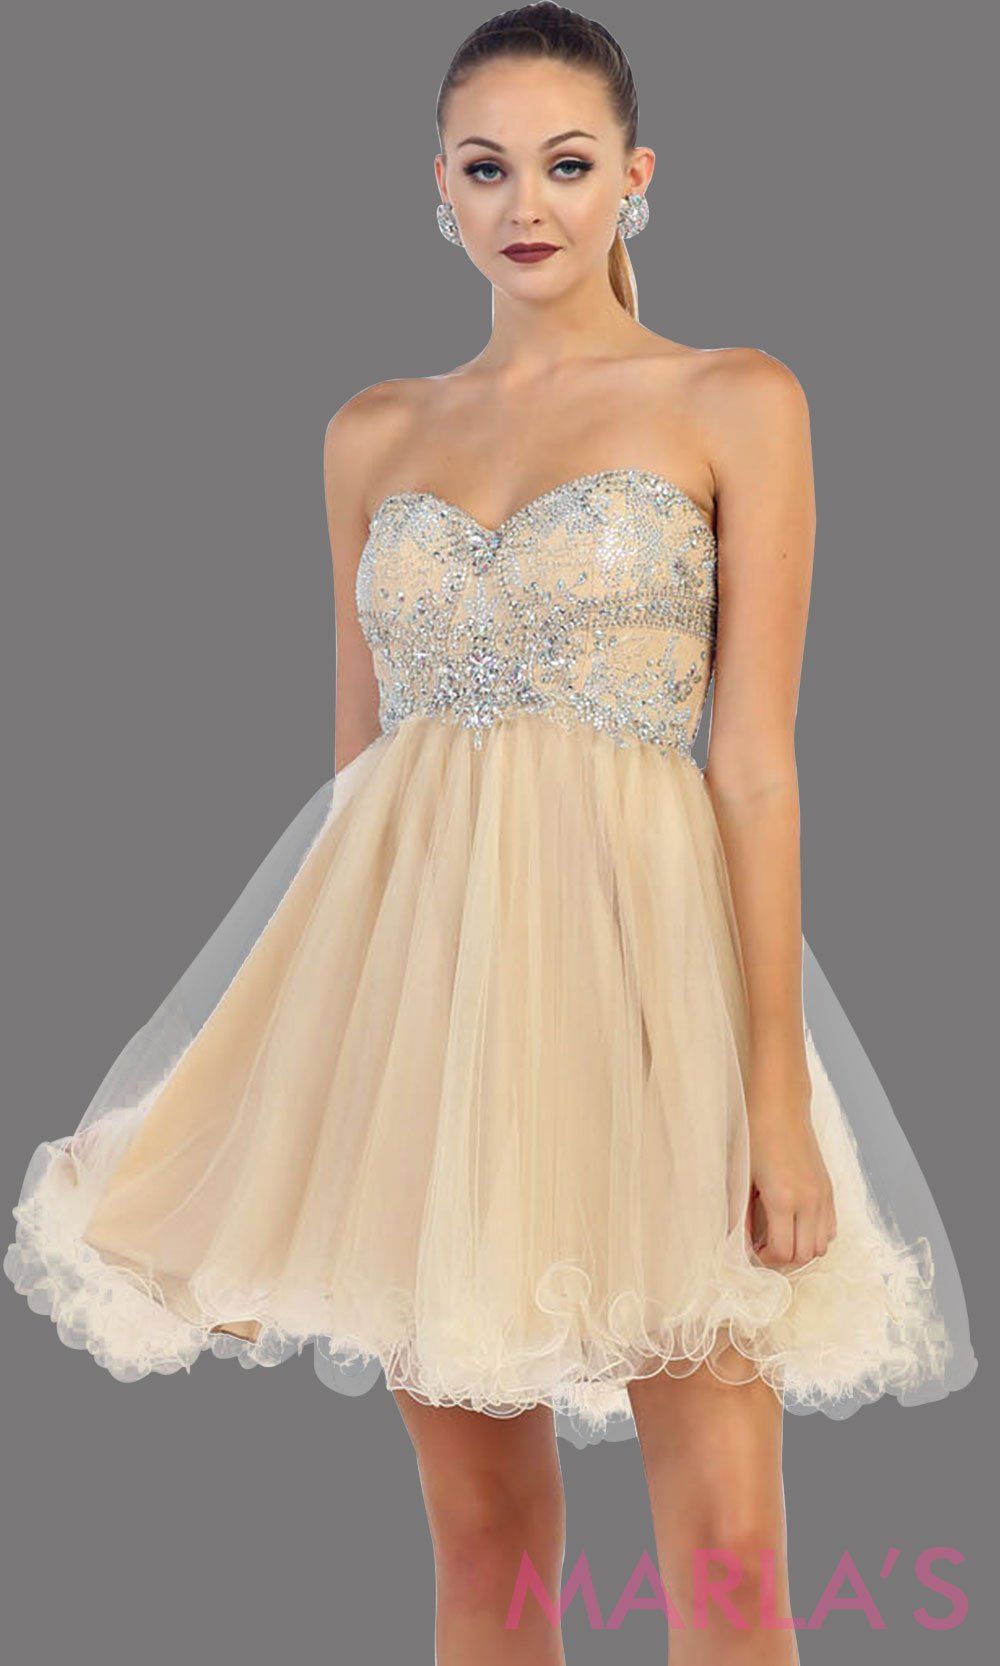 Short strapless puffy champagne dress. This short light gold grade 8 graduation dress has sequin bodice and corset back. This is perfect for homecoming, semi formal, bridal shower. Available in plus sizes.